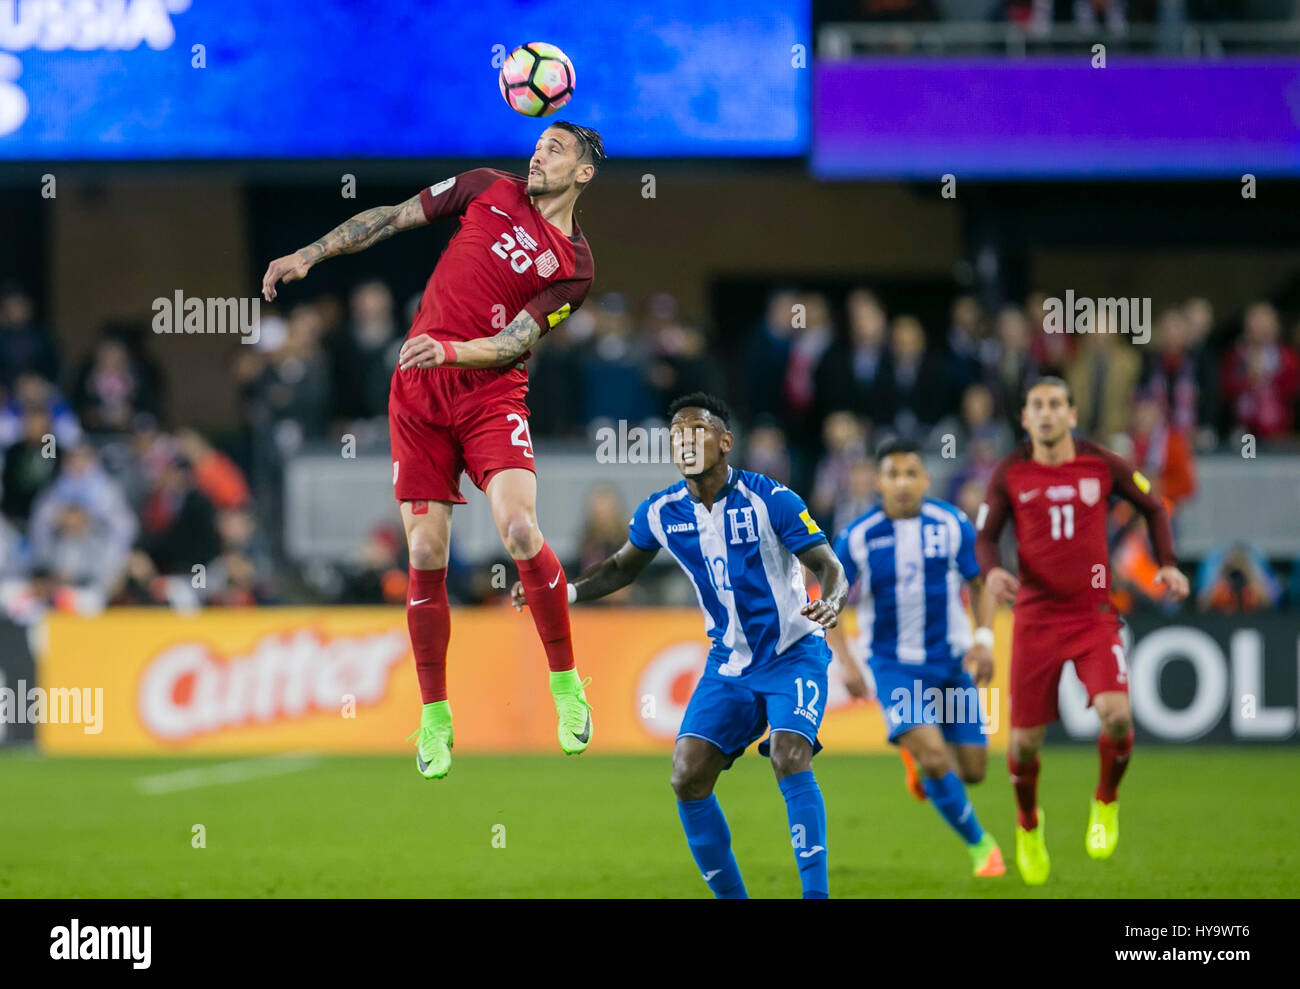 San Jose, CA. 24th Mar, 2017. US defender Geoff Cameron (20) in action during the FIFA World Cup Qualifying game between the United States and Honduras at Avaya Stadium in San Jose, CA. The US defeated Honduras 6-0. Damon Tarver/Cal Sport Media/Alamy Live News Stock Photo